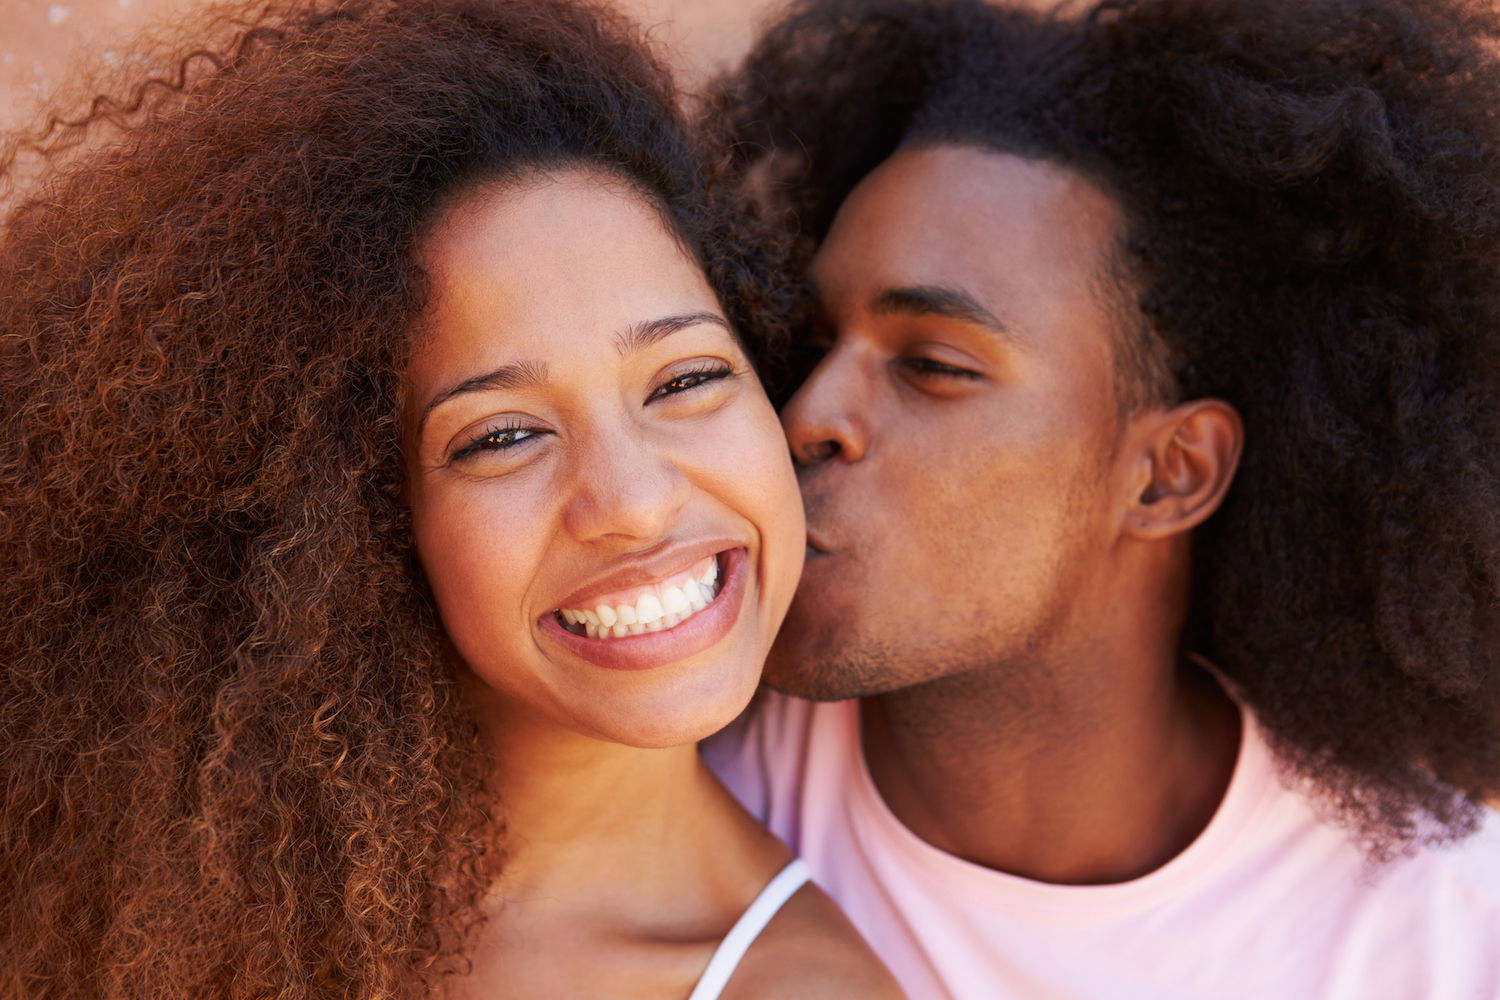 A dark skinned couple with large curly hair, the girl is smiling at the camera and the man is kissing her cheek.